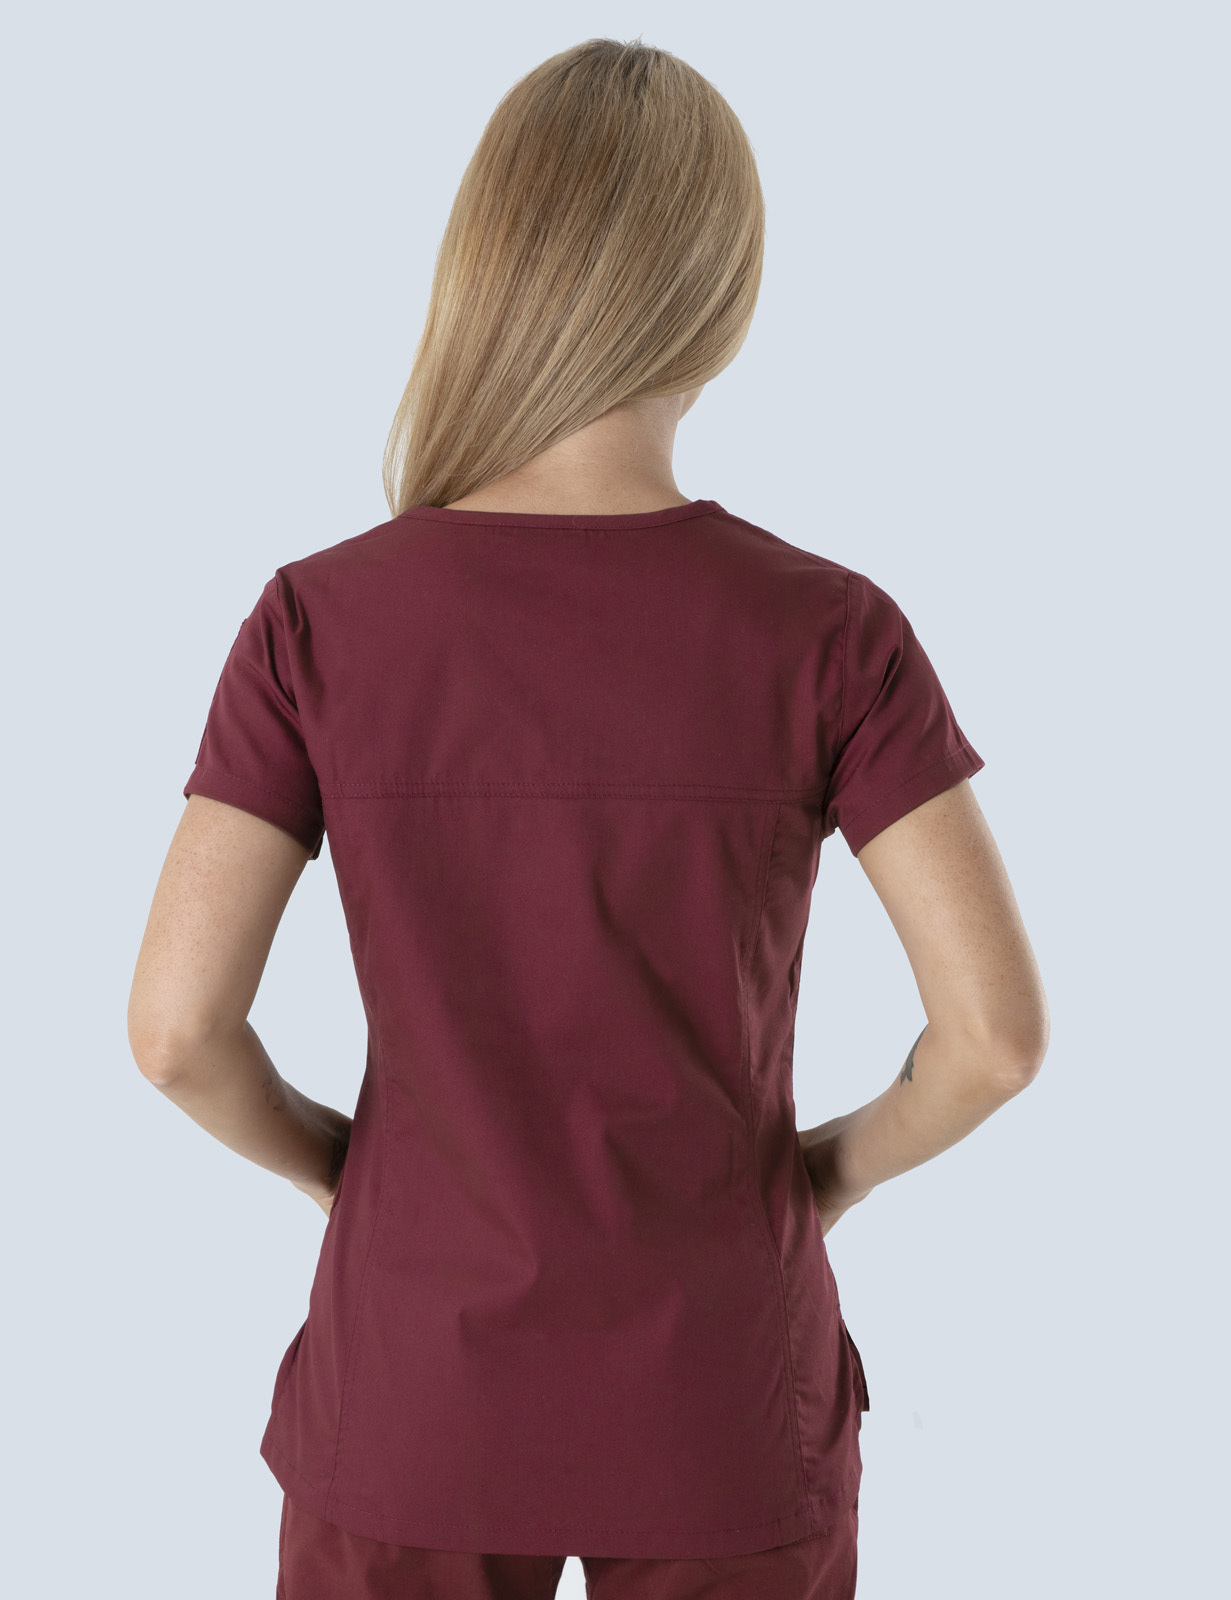 Women's Fit Solid Scrub Top - Burgundy - Small - 1